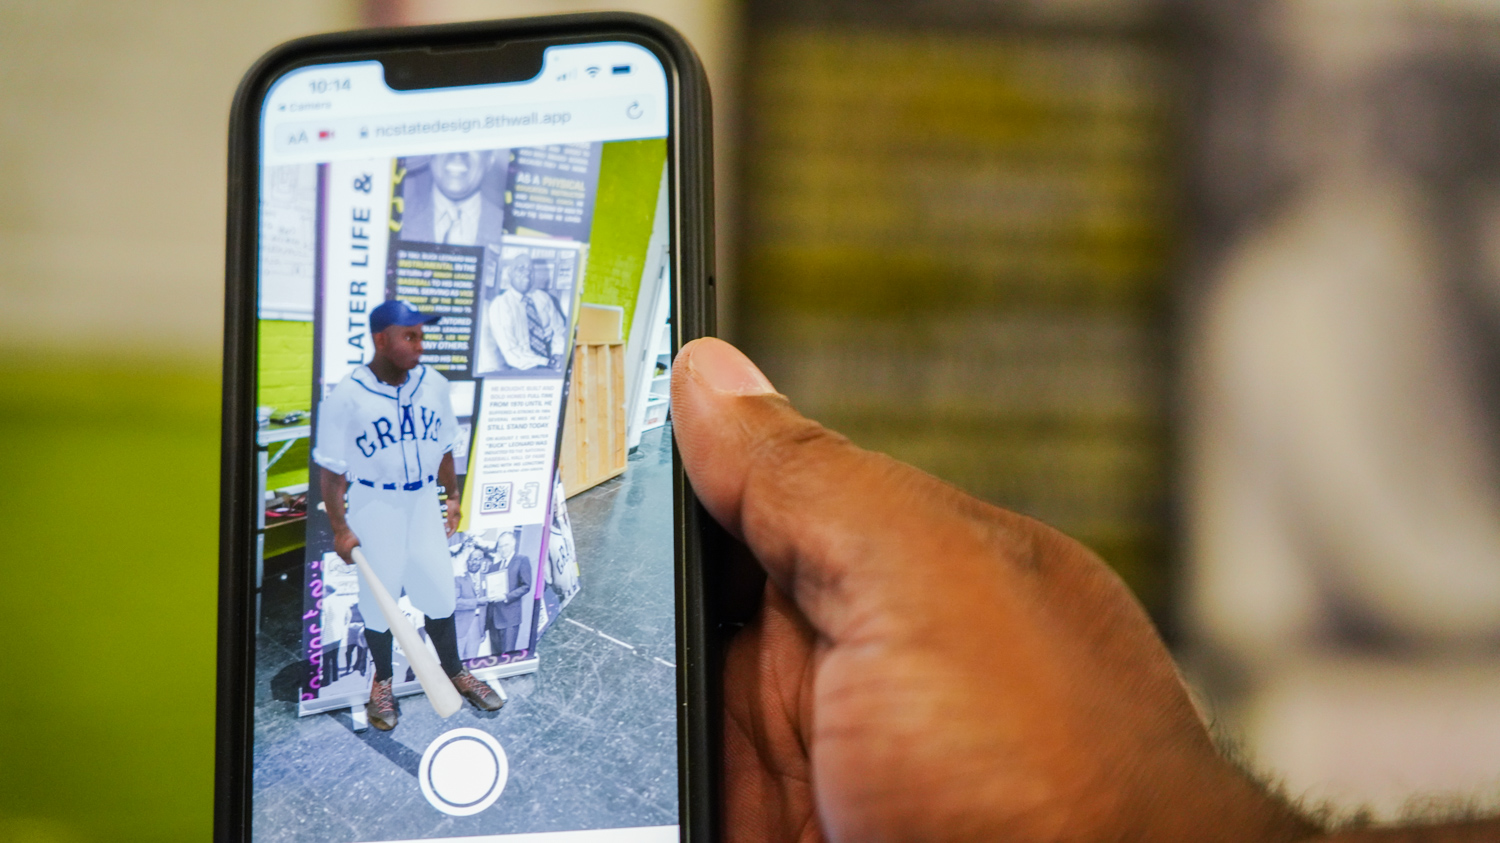 Professor Derek Ham demonstrates how augmented reality can highlight the history of Negro League Baseball and the impact of players like Buck Leonard.